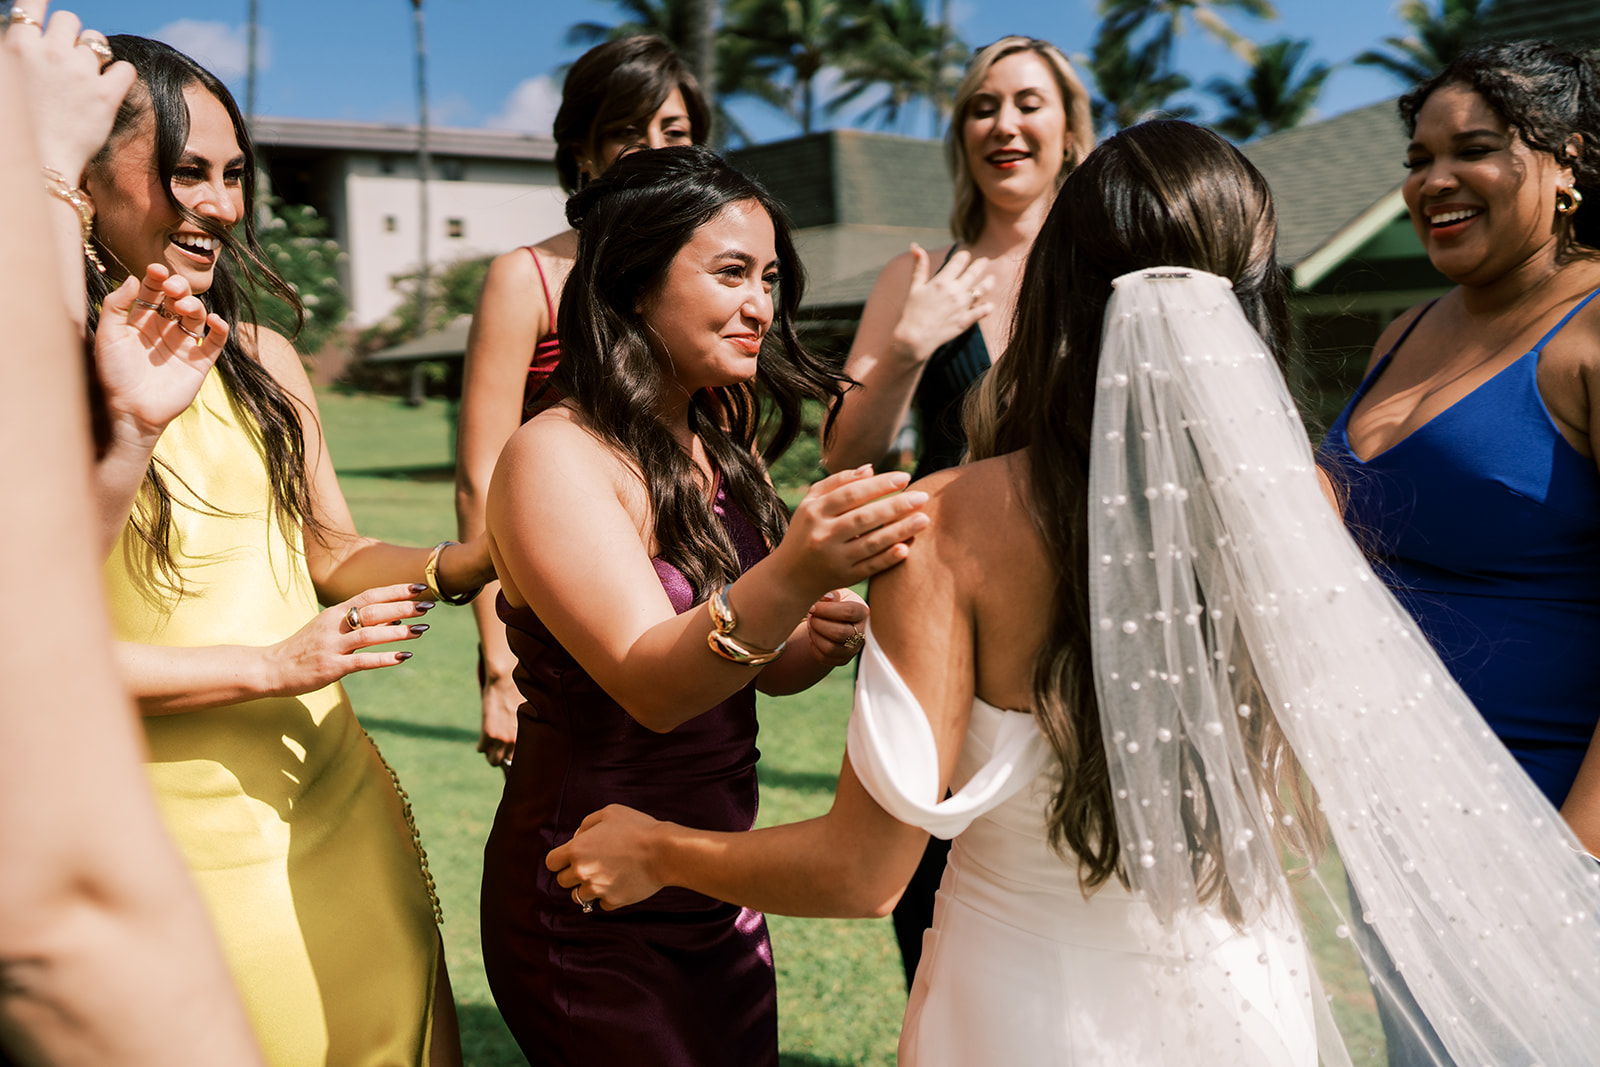 A bride in a white dress with a veil receiving congratulations from a group of smiling women in colorful dresses